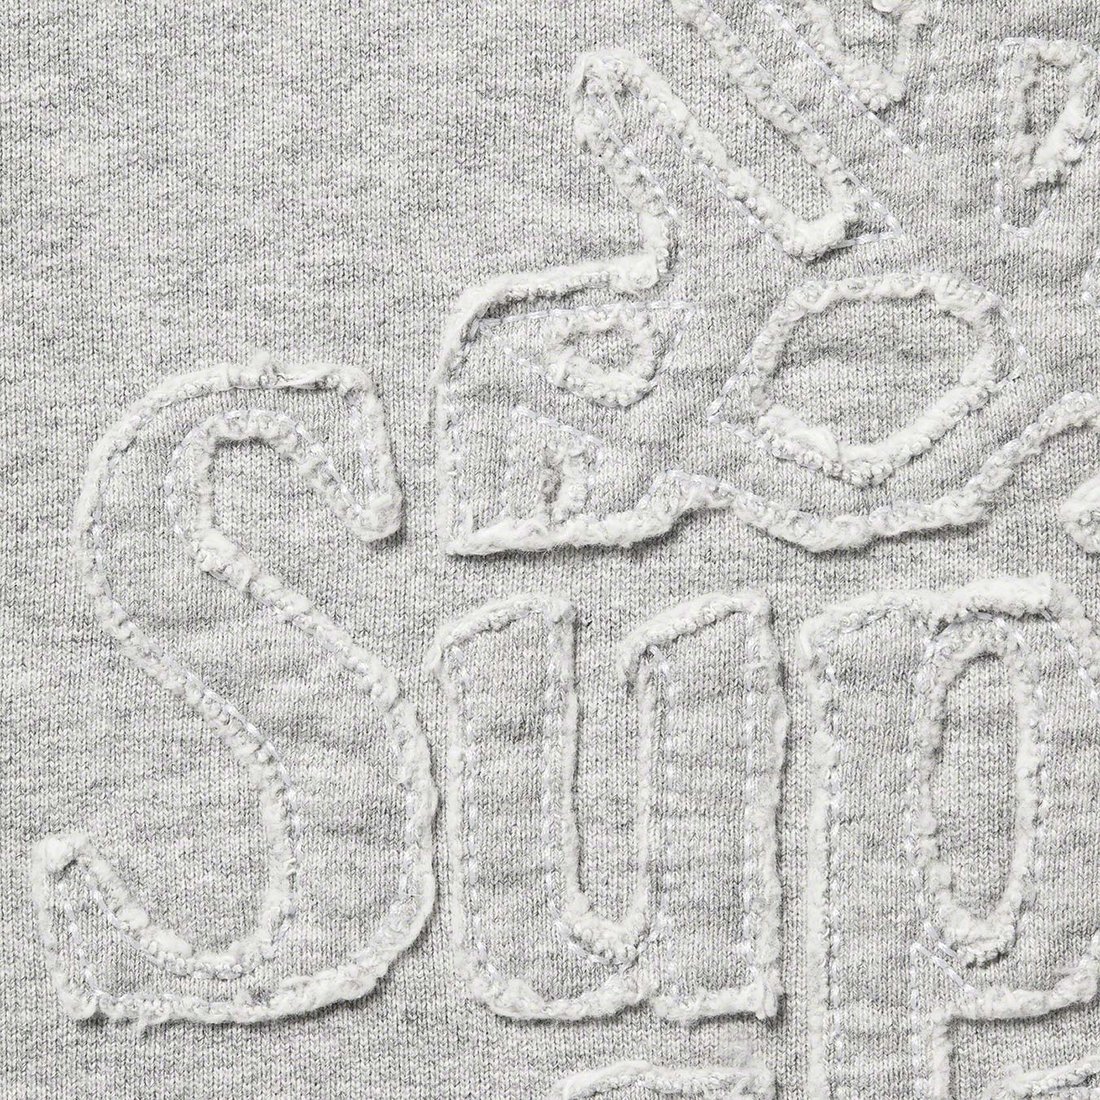 Details on Supreme Timberland Hooded Sweatshirt Heather Grey from spring summer 2023 (Price is $158)